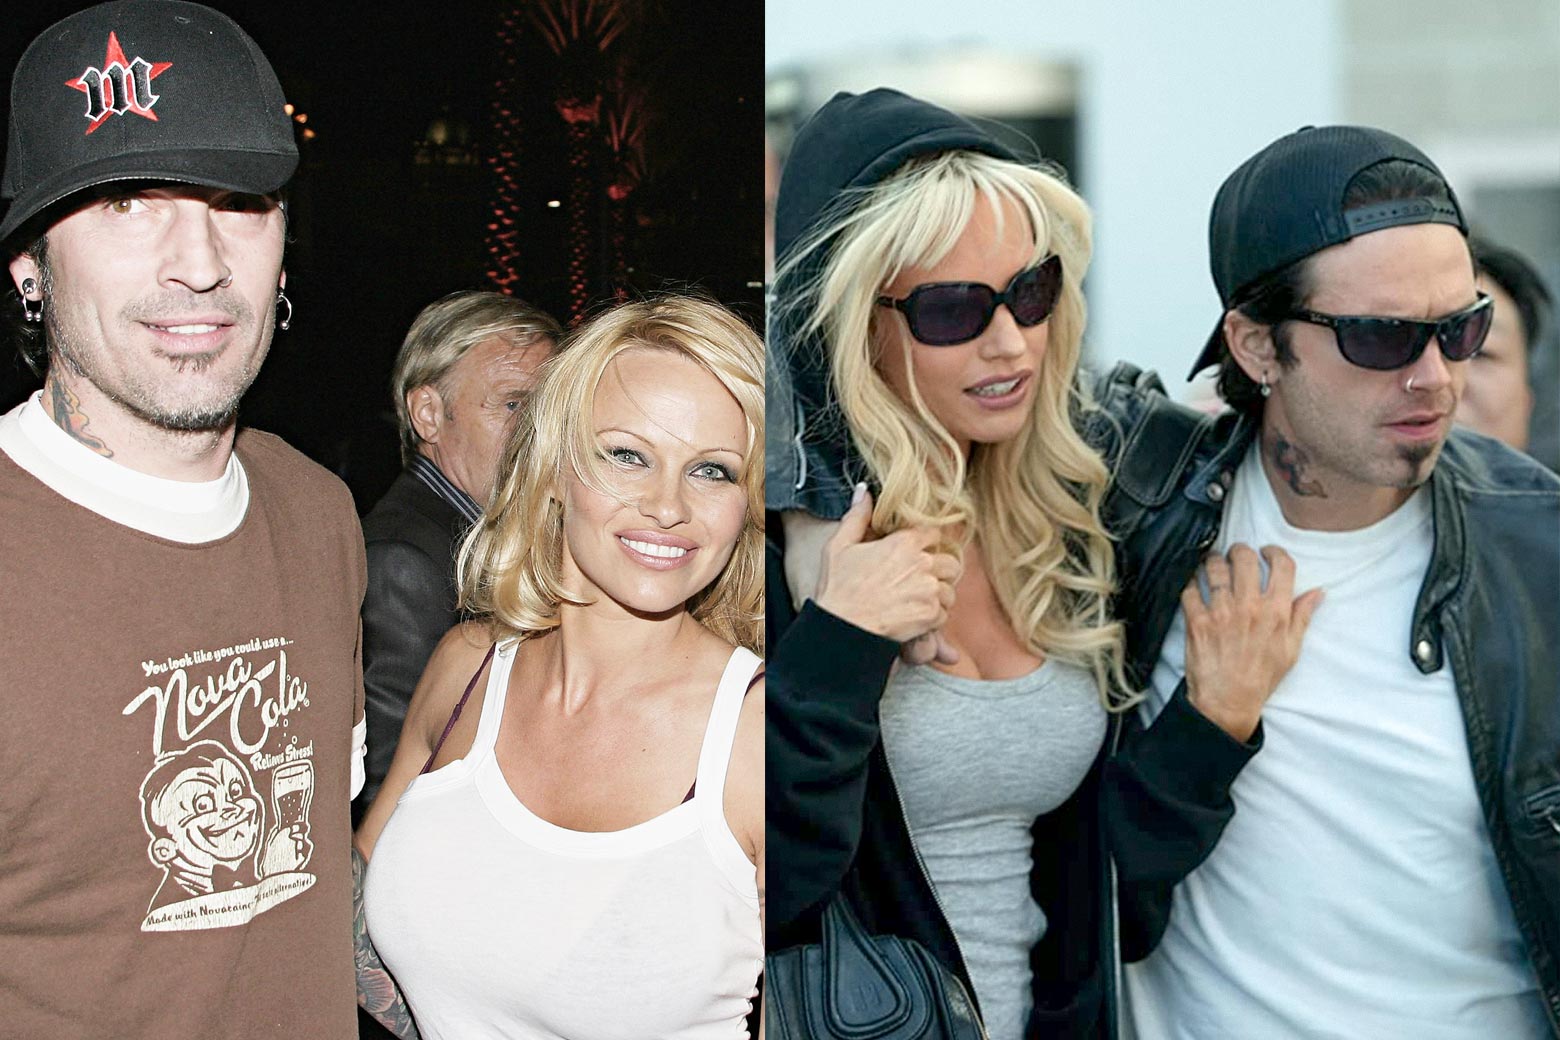 Pam and Tommy accuracy whats fact and whats fiction in the Hulu miniseries about Pamela Anderson and Tommy Lee.